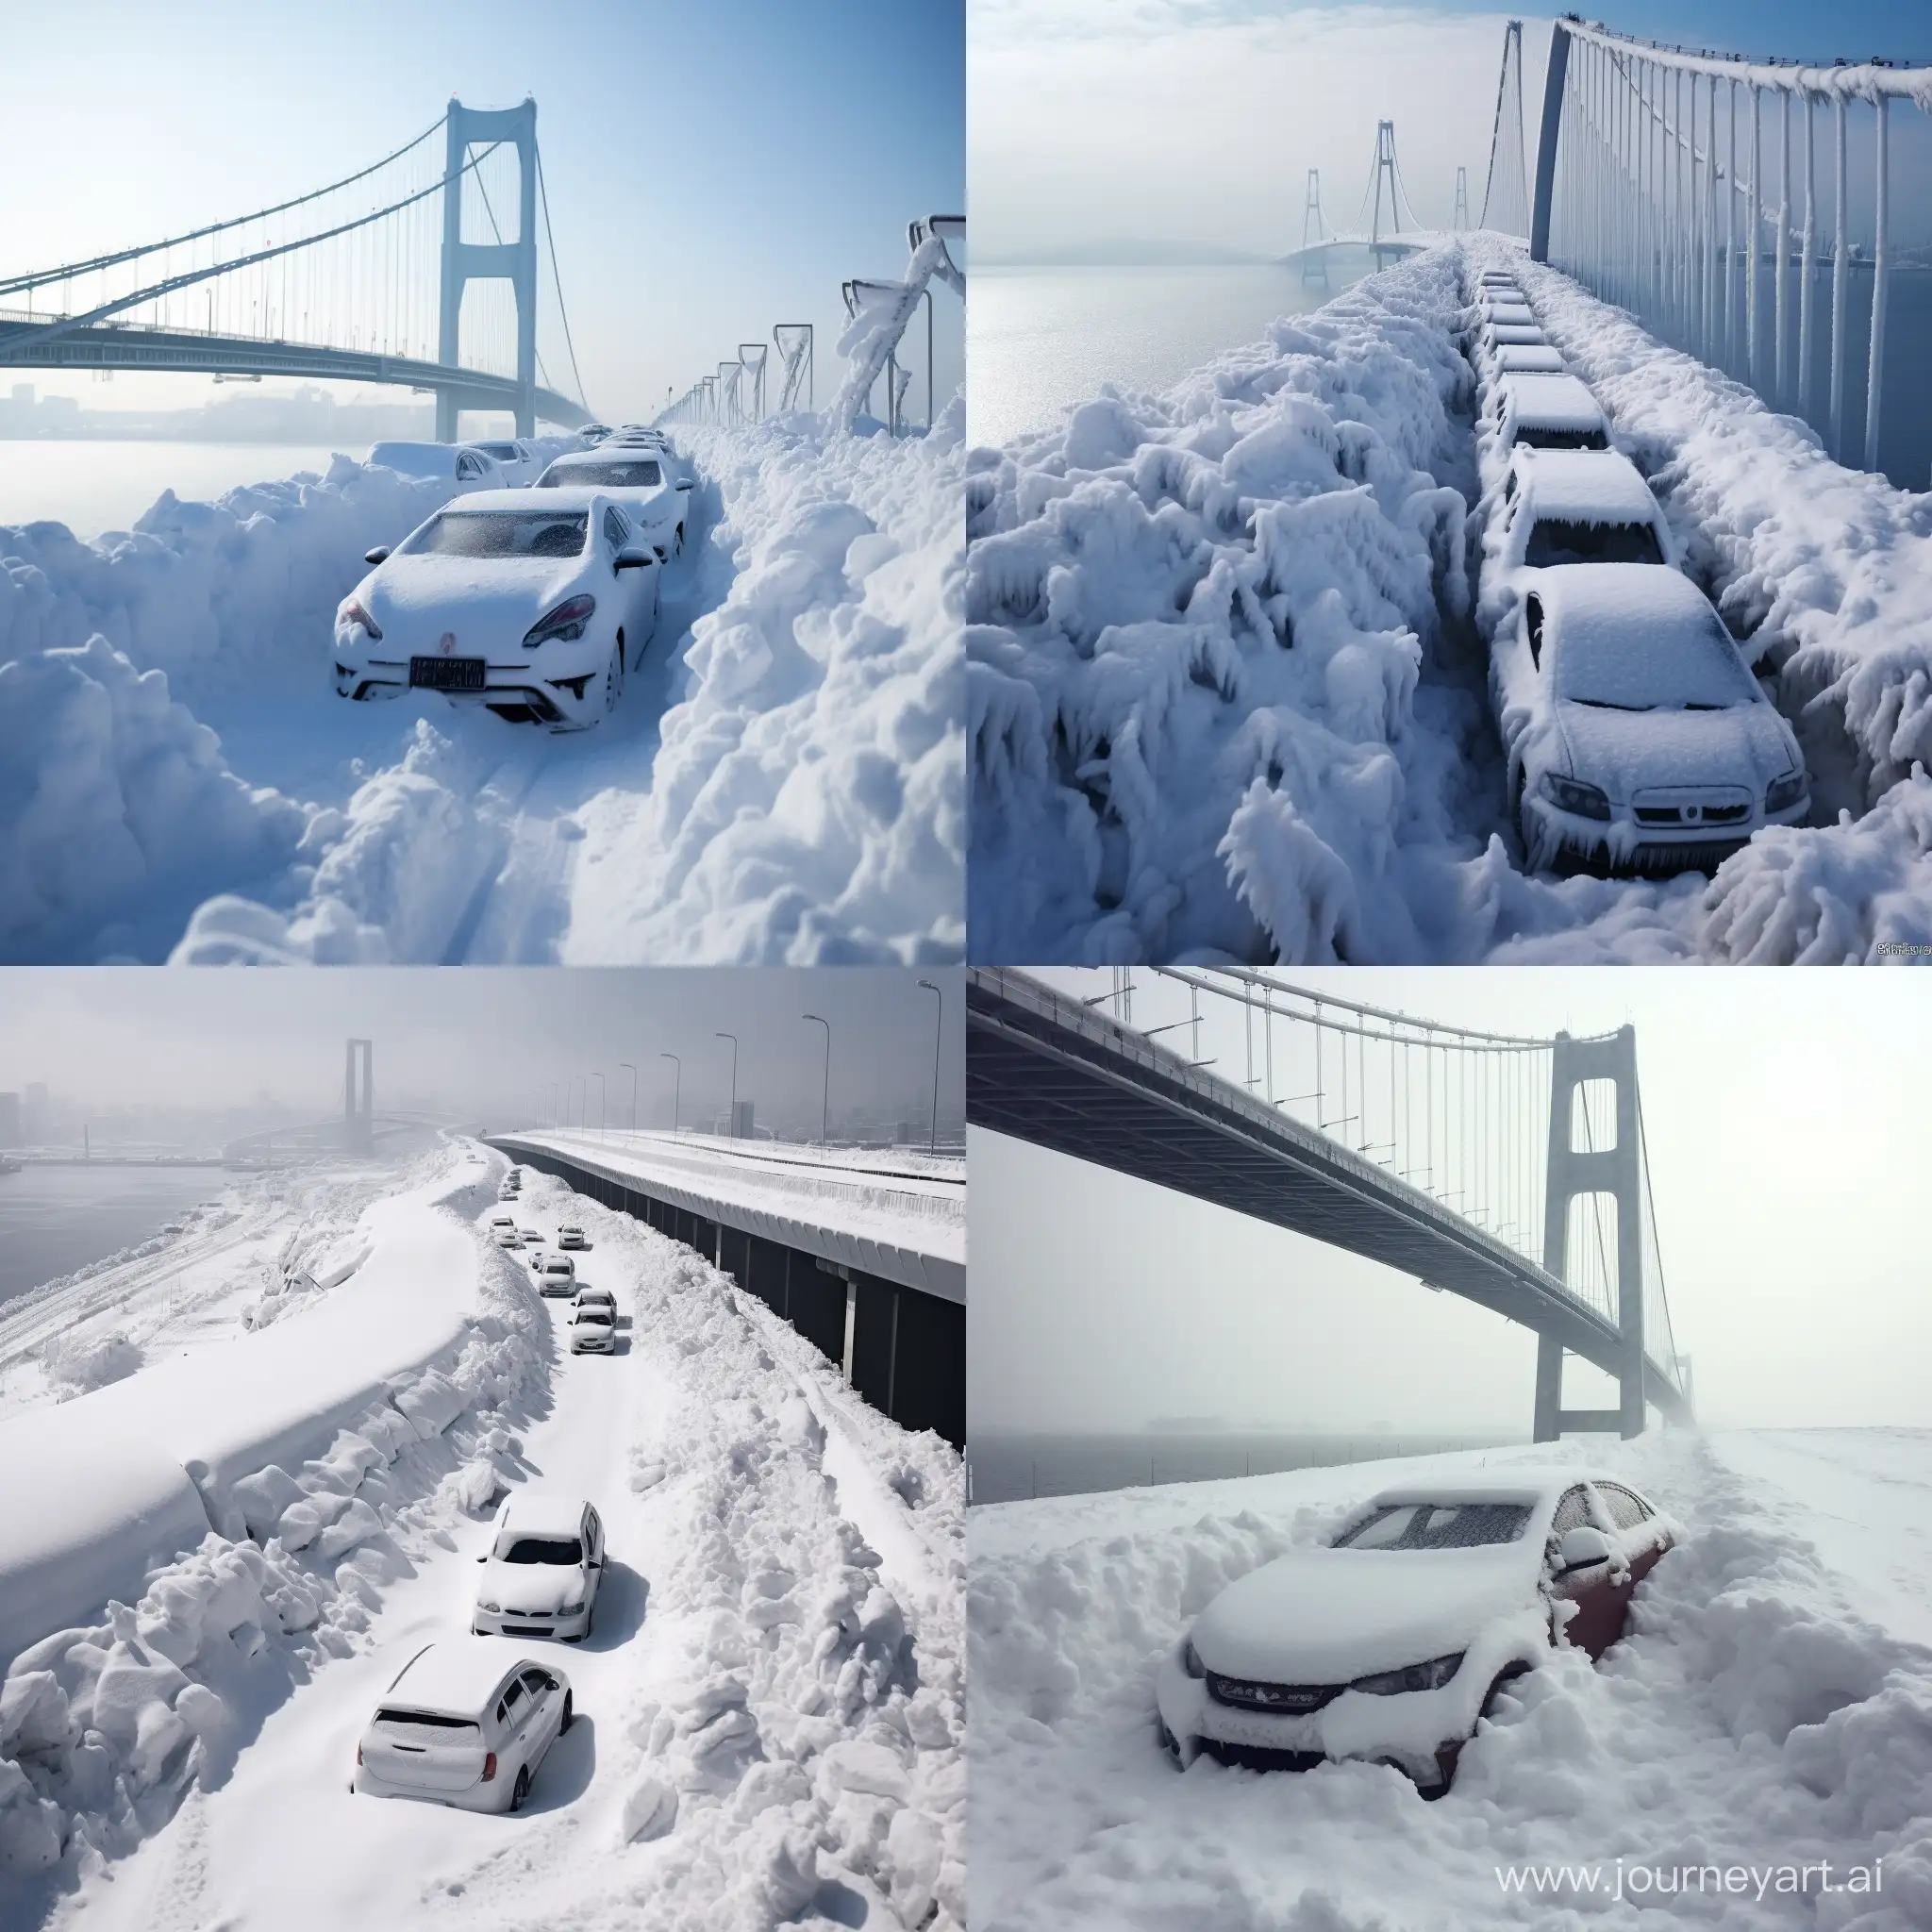 Istanbul-Bosphorus-Bridge-Covered-in-Thick-Snow-with-Buried-Cars